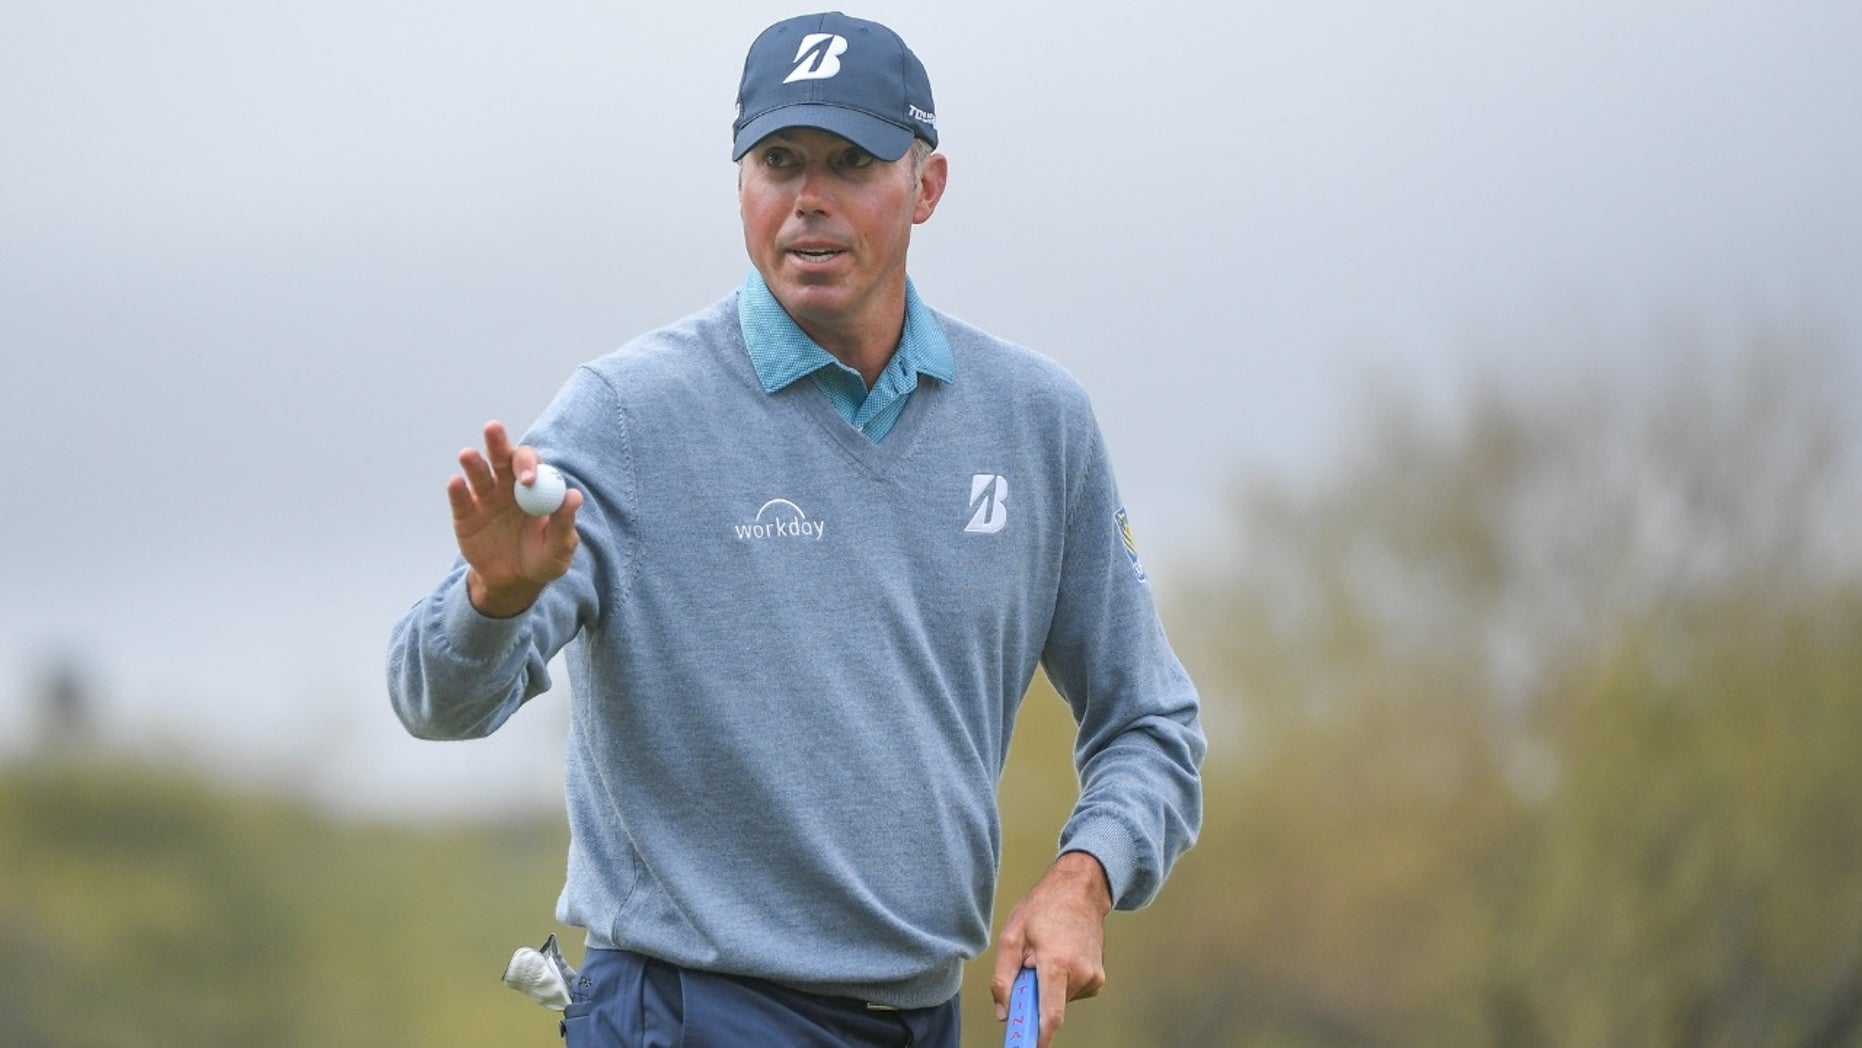 Matt Kuchar defends paying caddie $5G after winning millions in tournament: ‘You can’t make everybody happy’ - Fox News